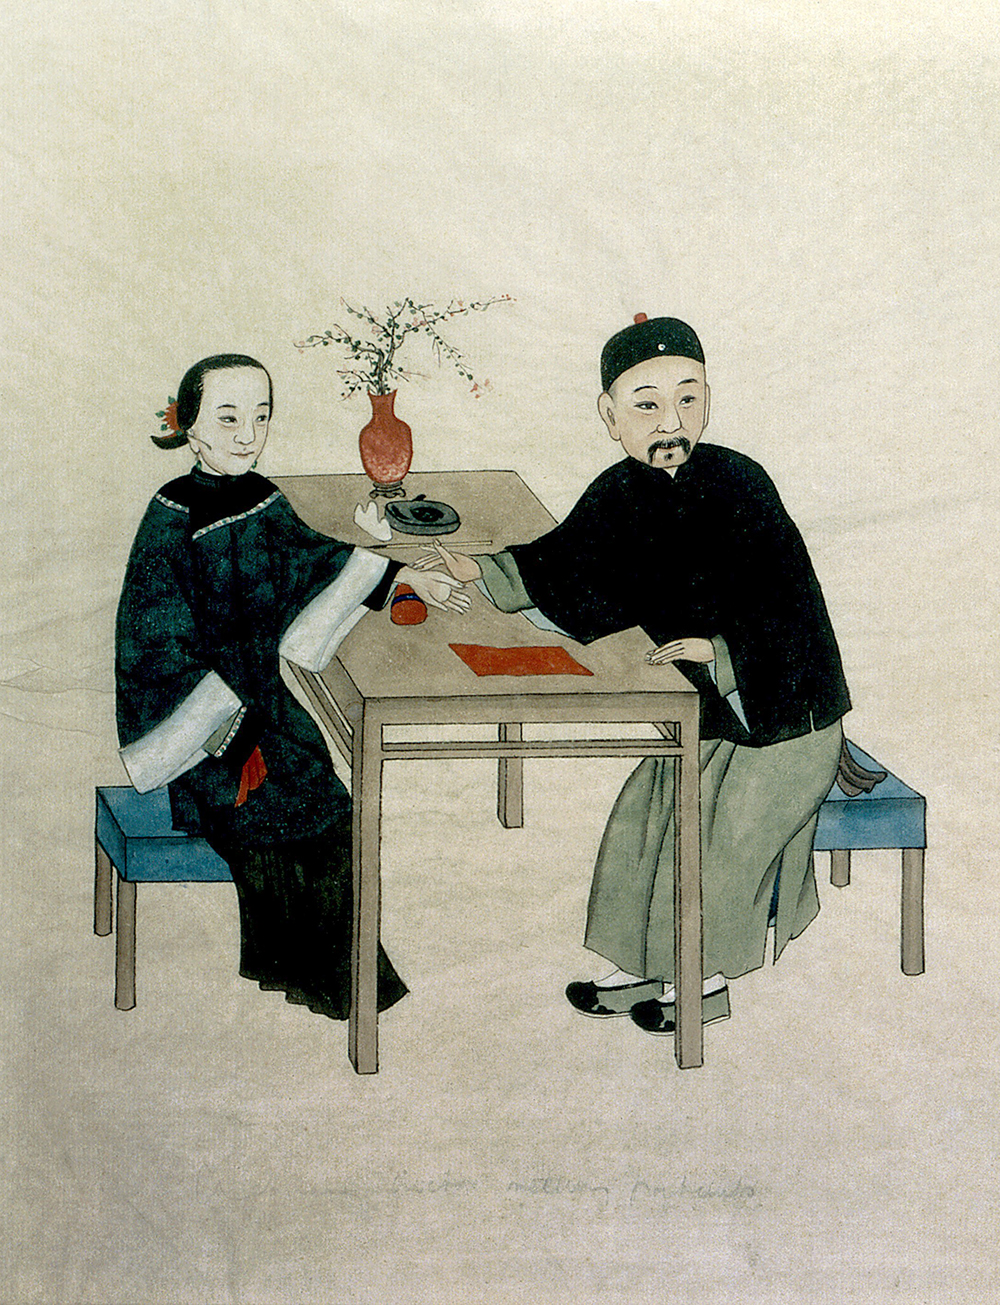 A doctor taking the pulse of a woman patient, by Pei Qun Zhou, c. 1890. Wellcome Collection.